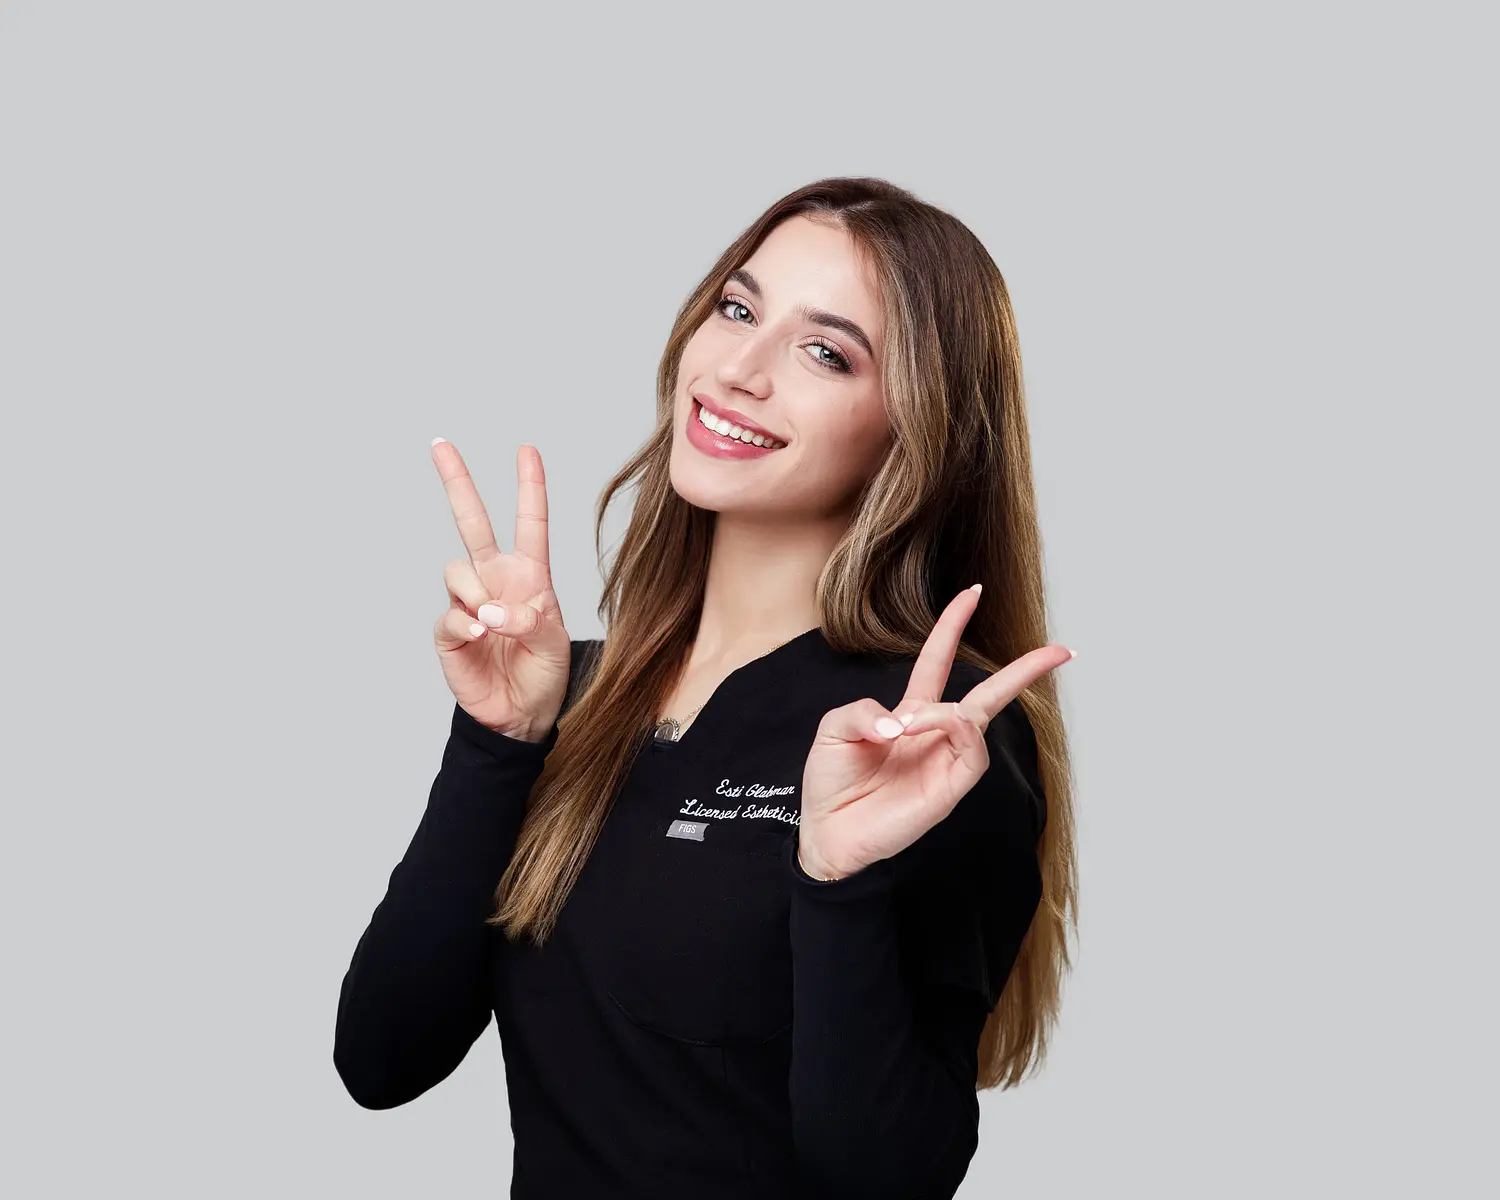 Glow Aesthetics Team Member smiling and holding up two fingers